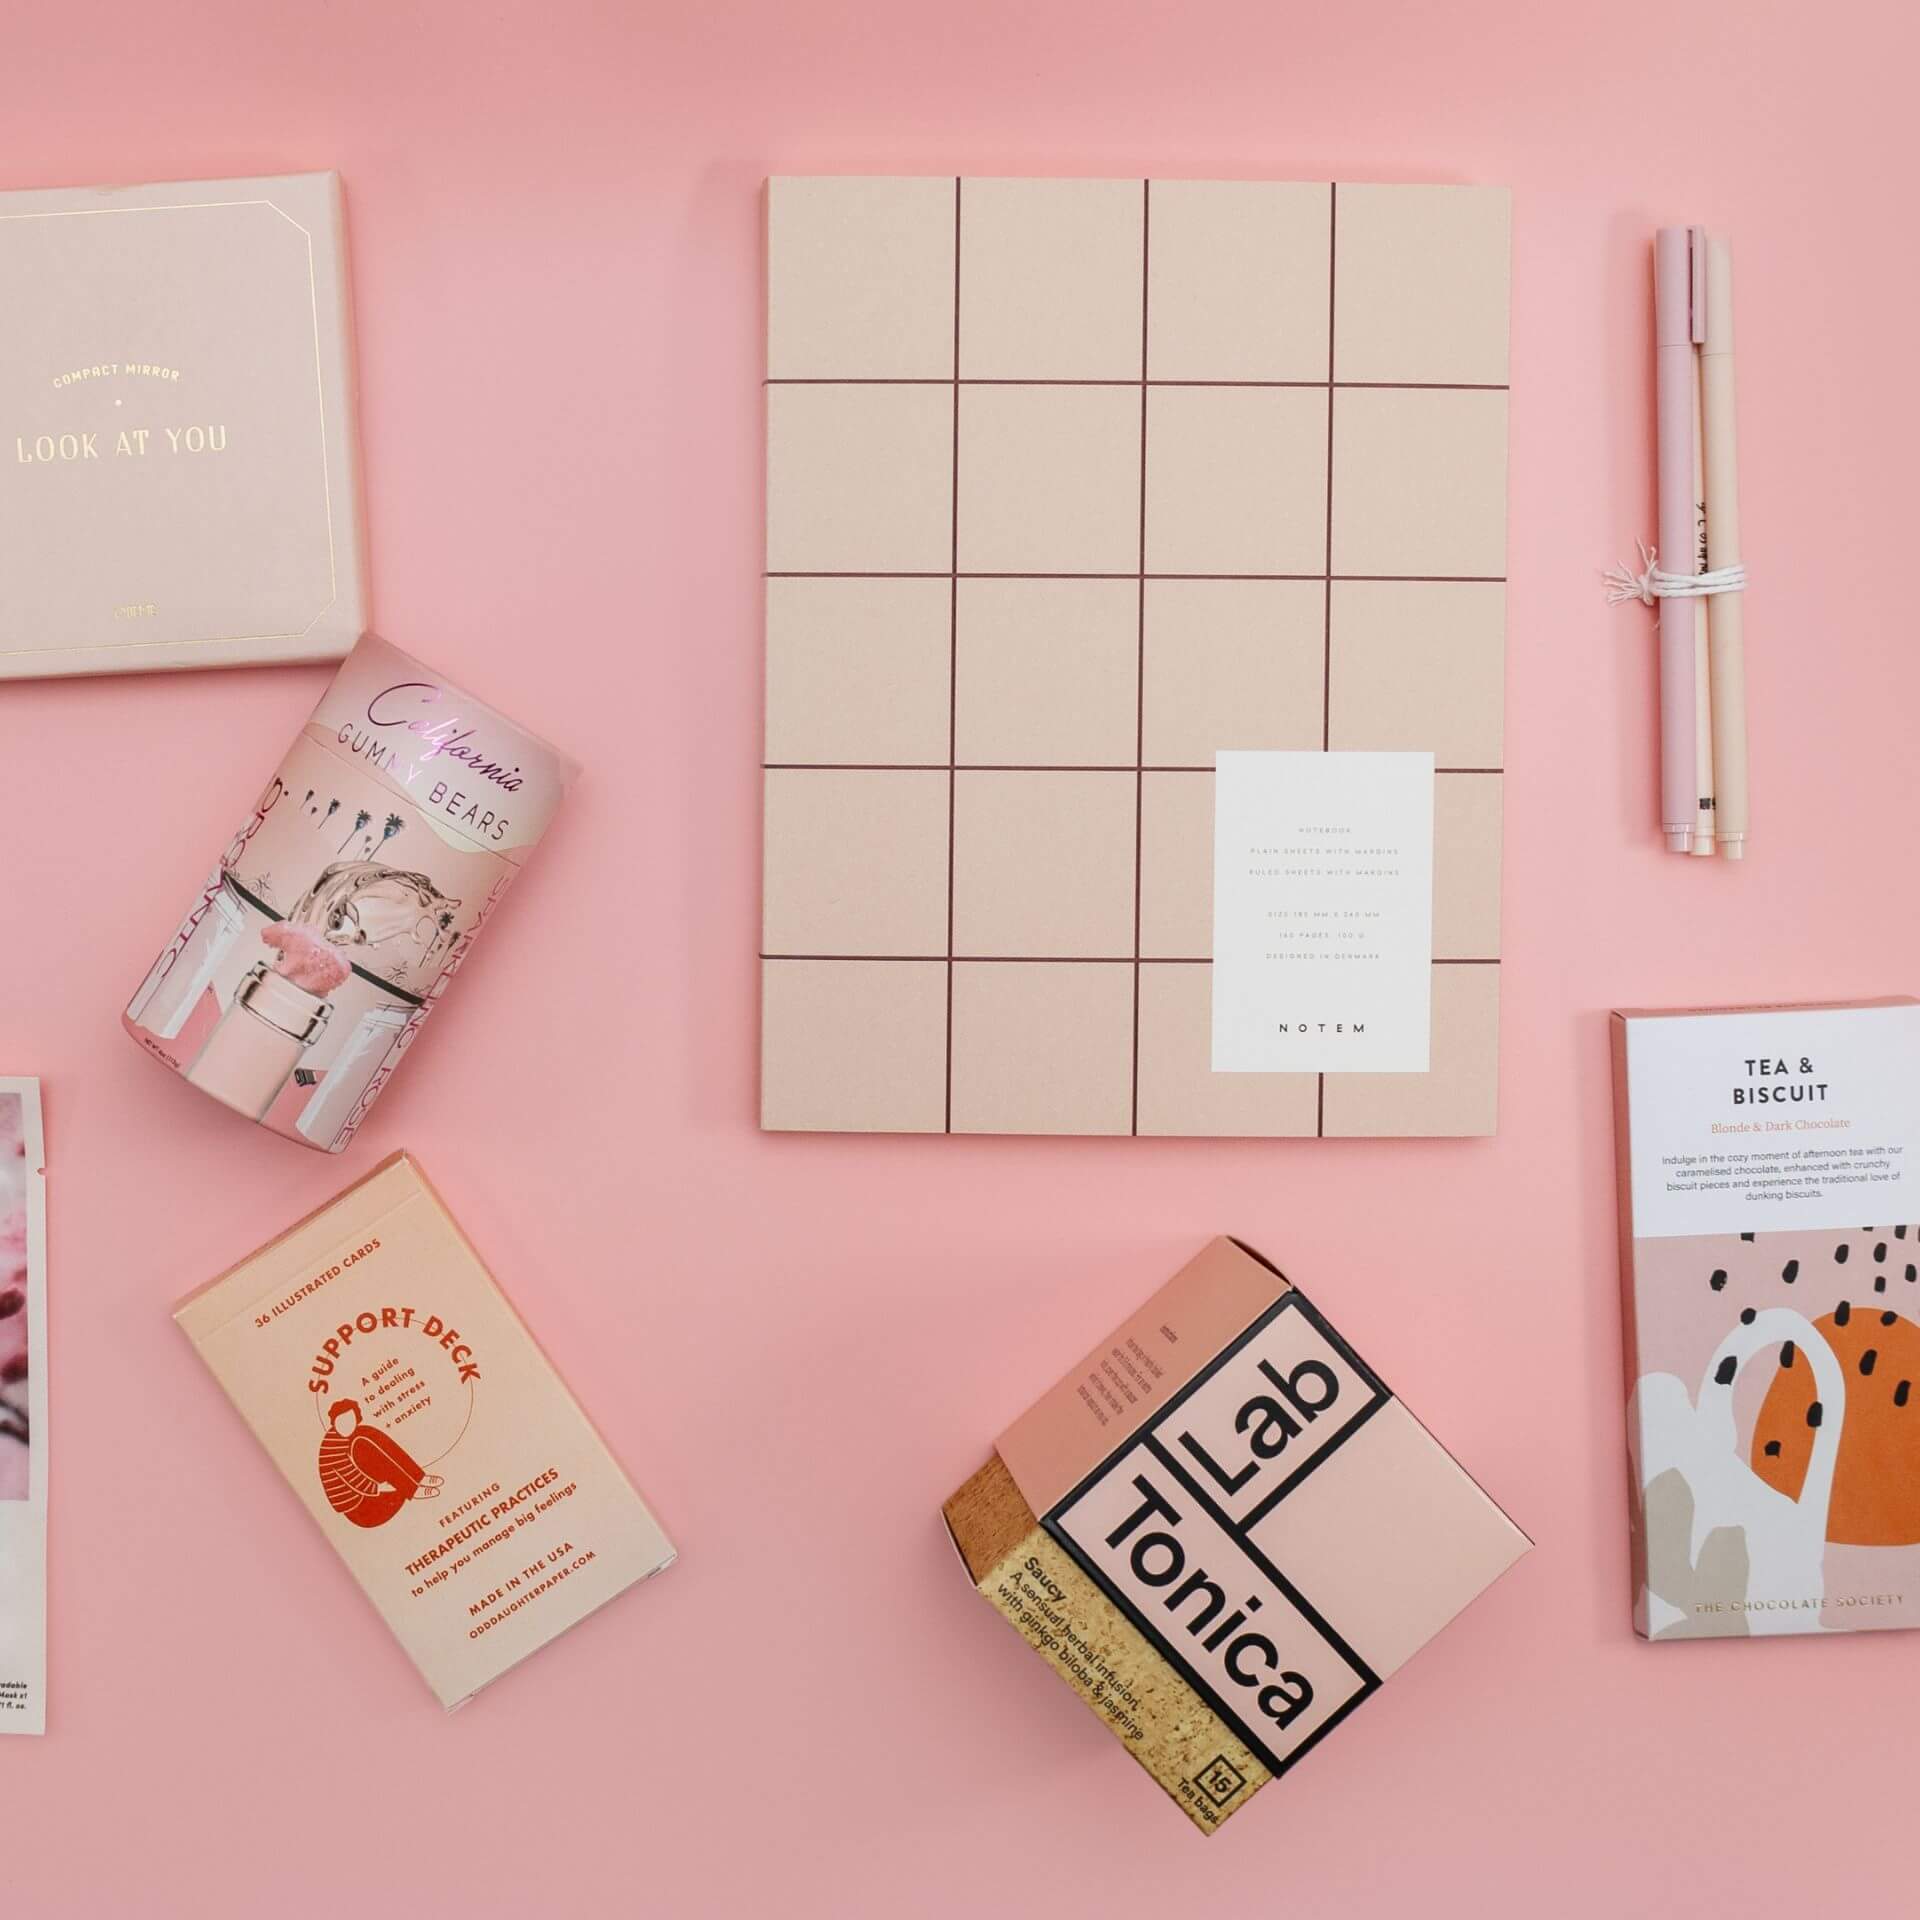 pink gifts - notebook, tea, chocolate, sweets, pens, mirror - against a pink background